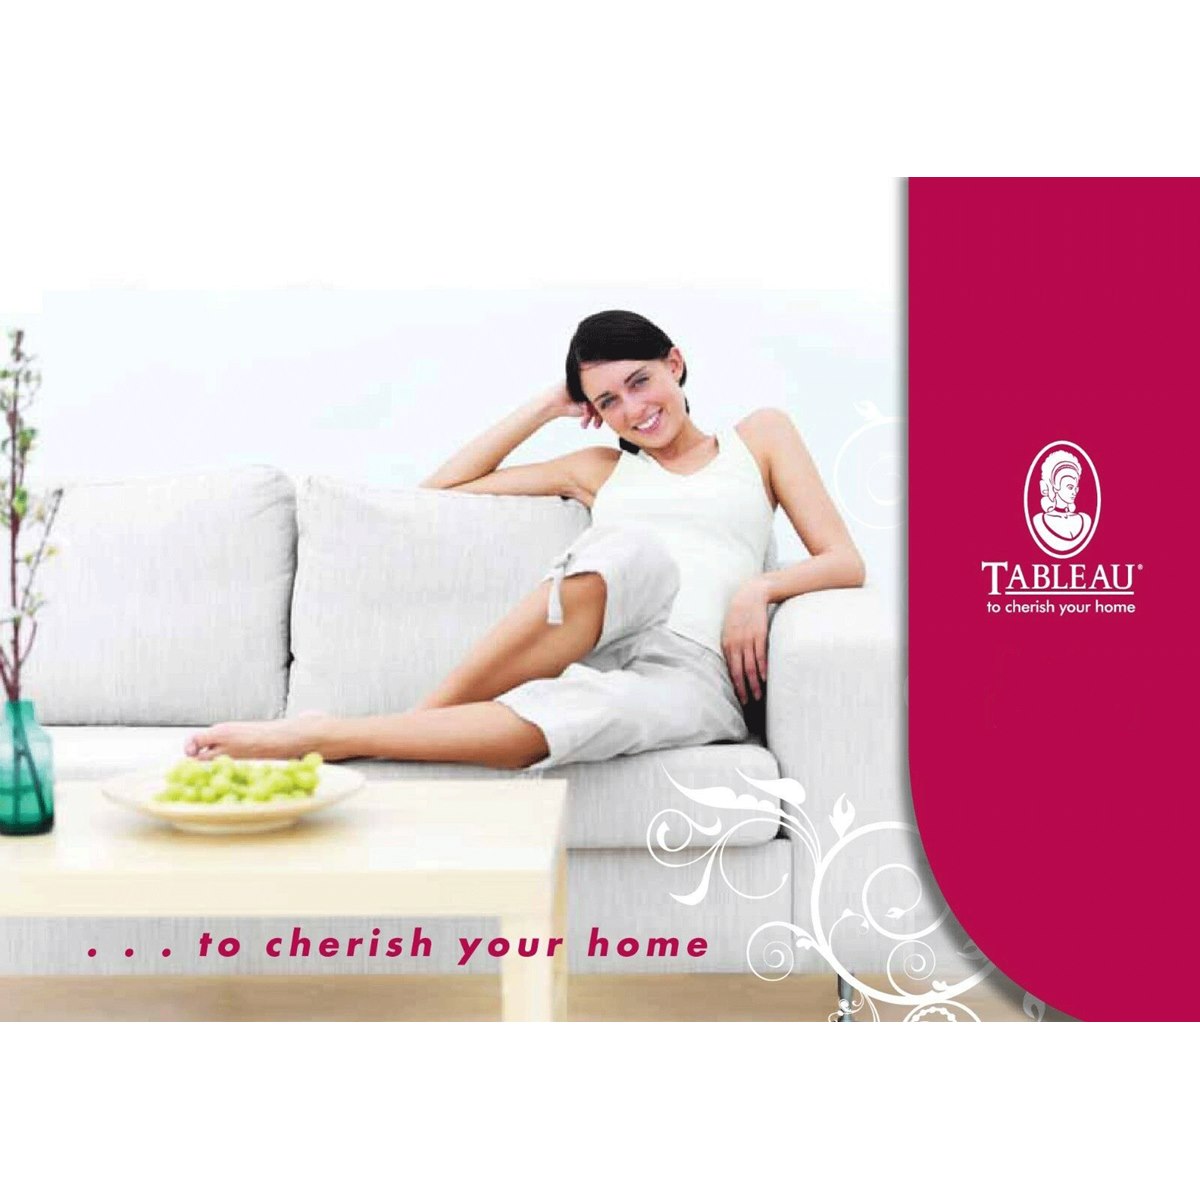 Where to buy Tableau Household Products